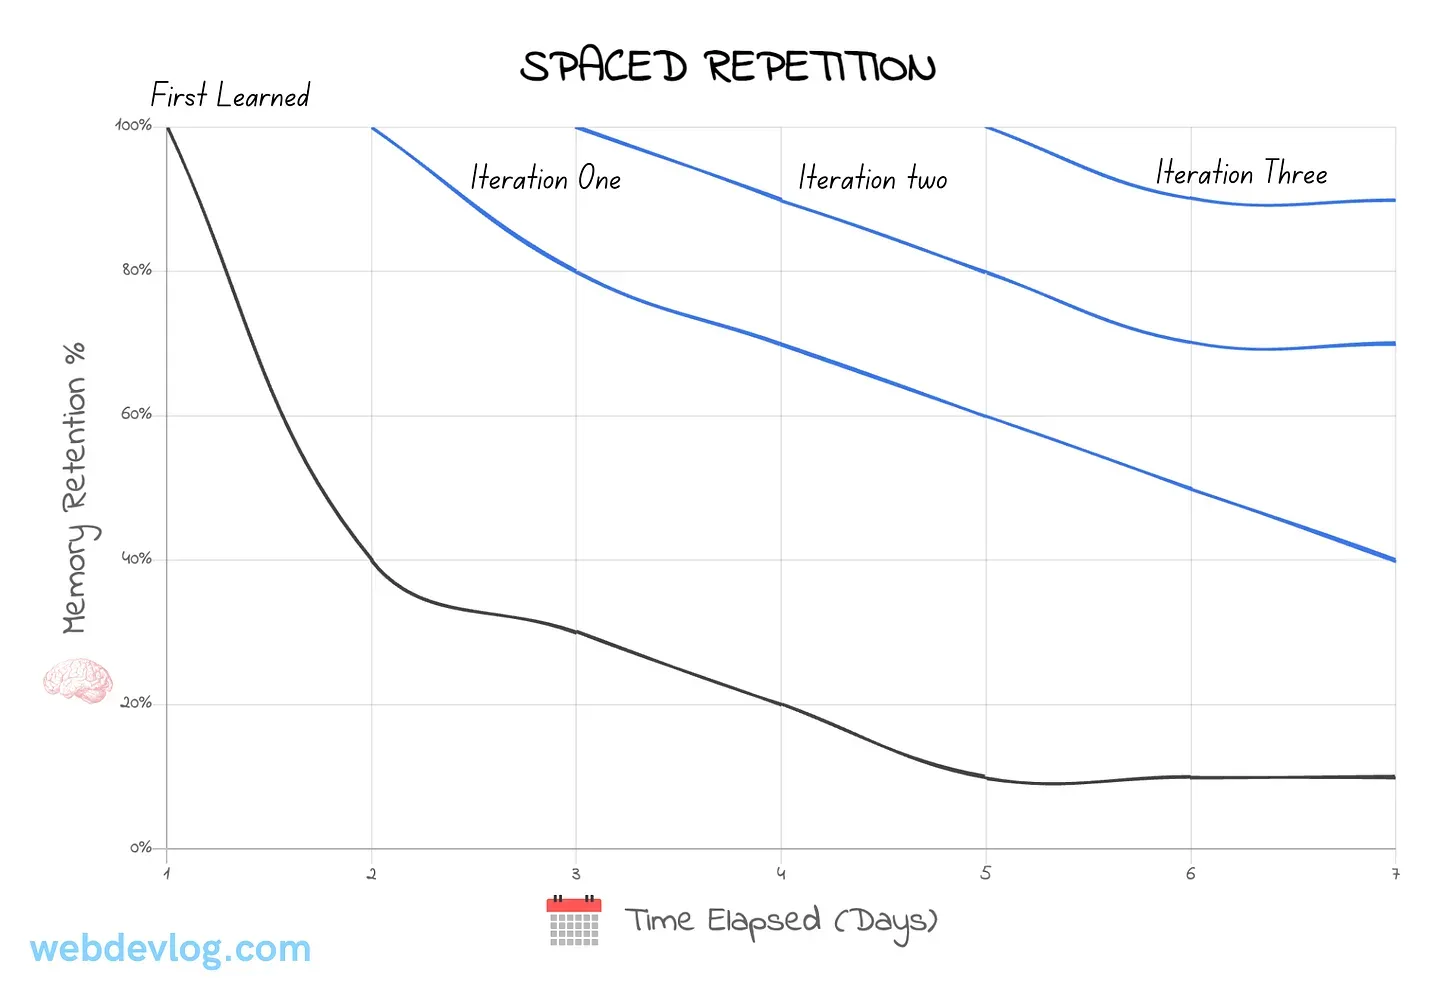 Using spaced repetition